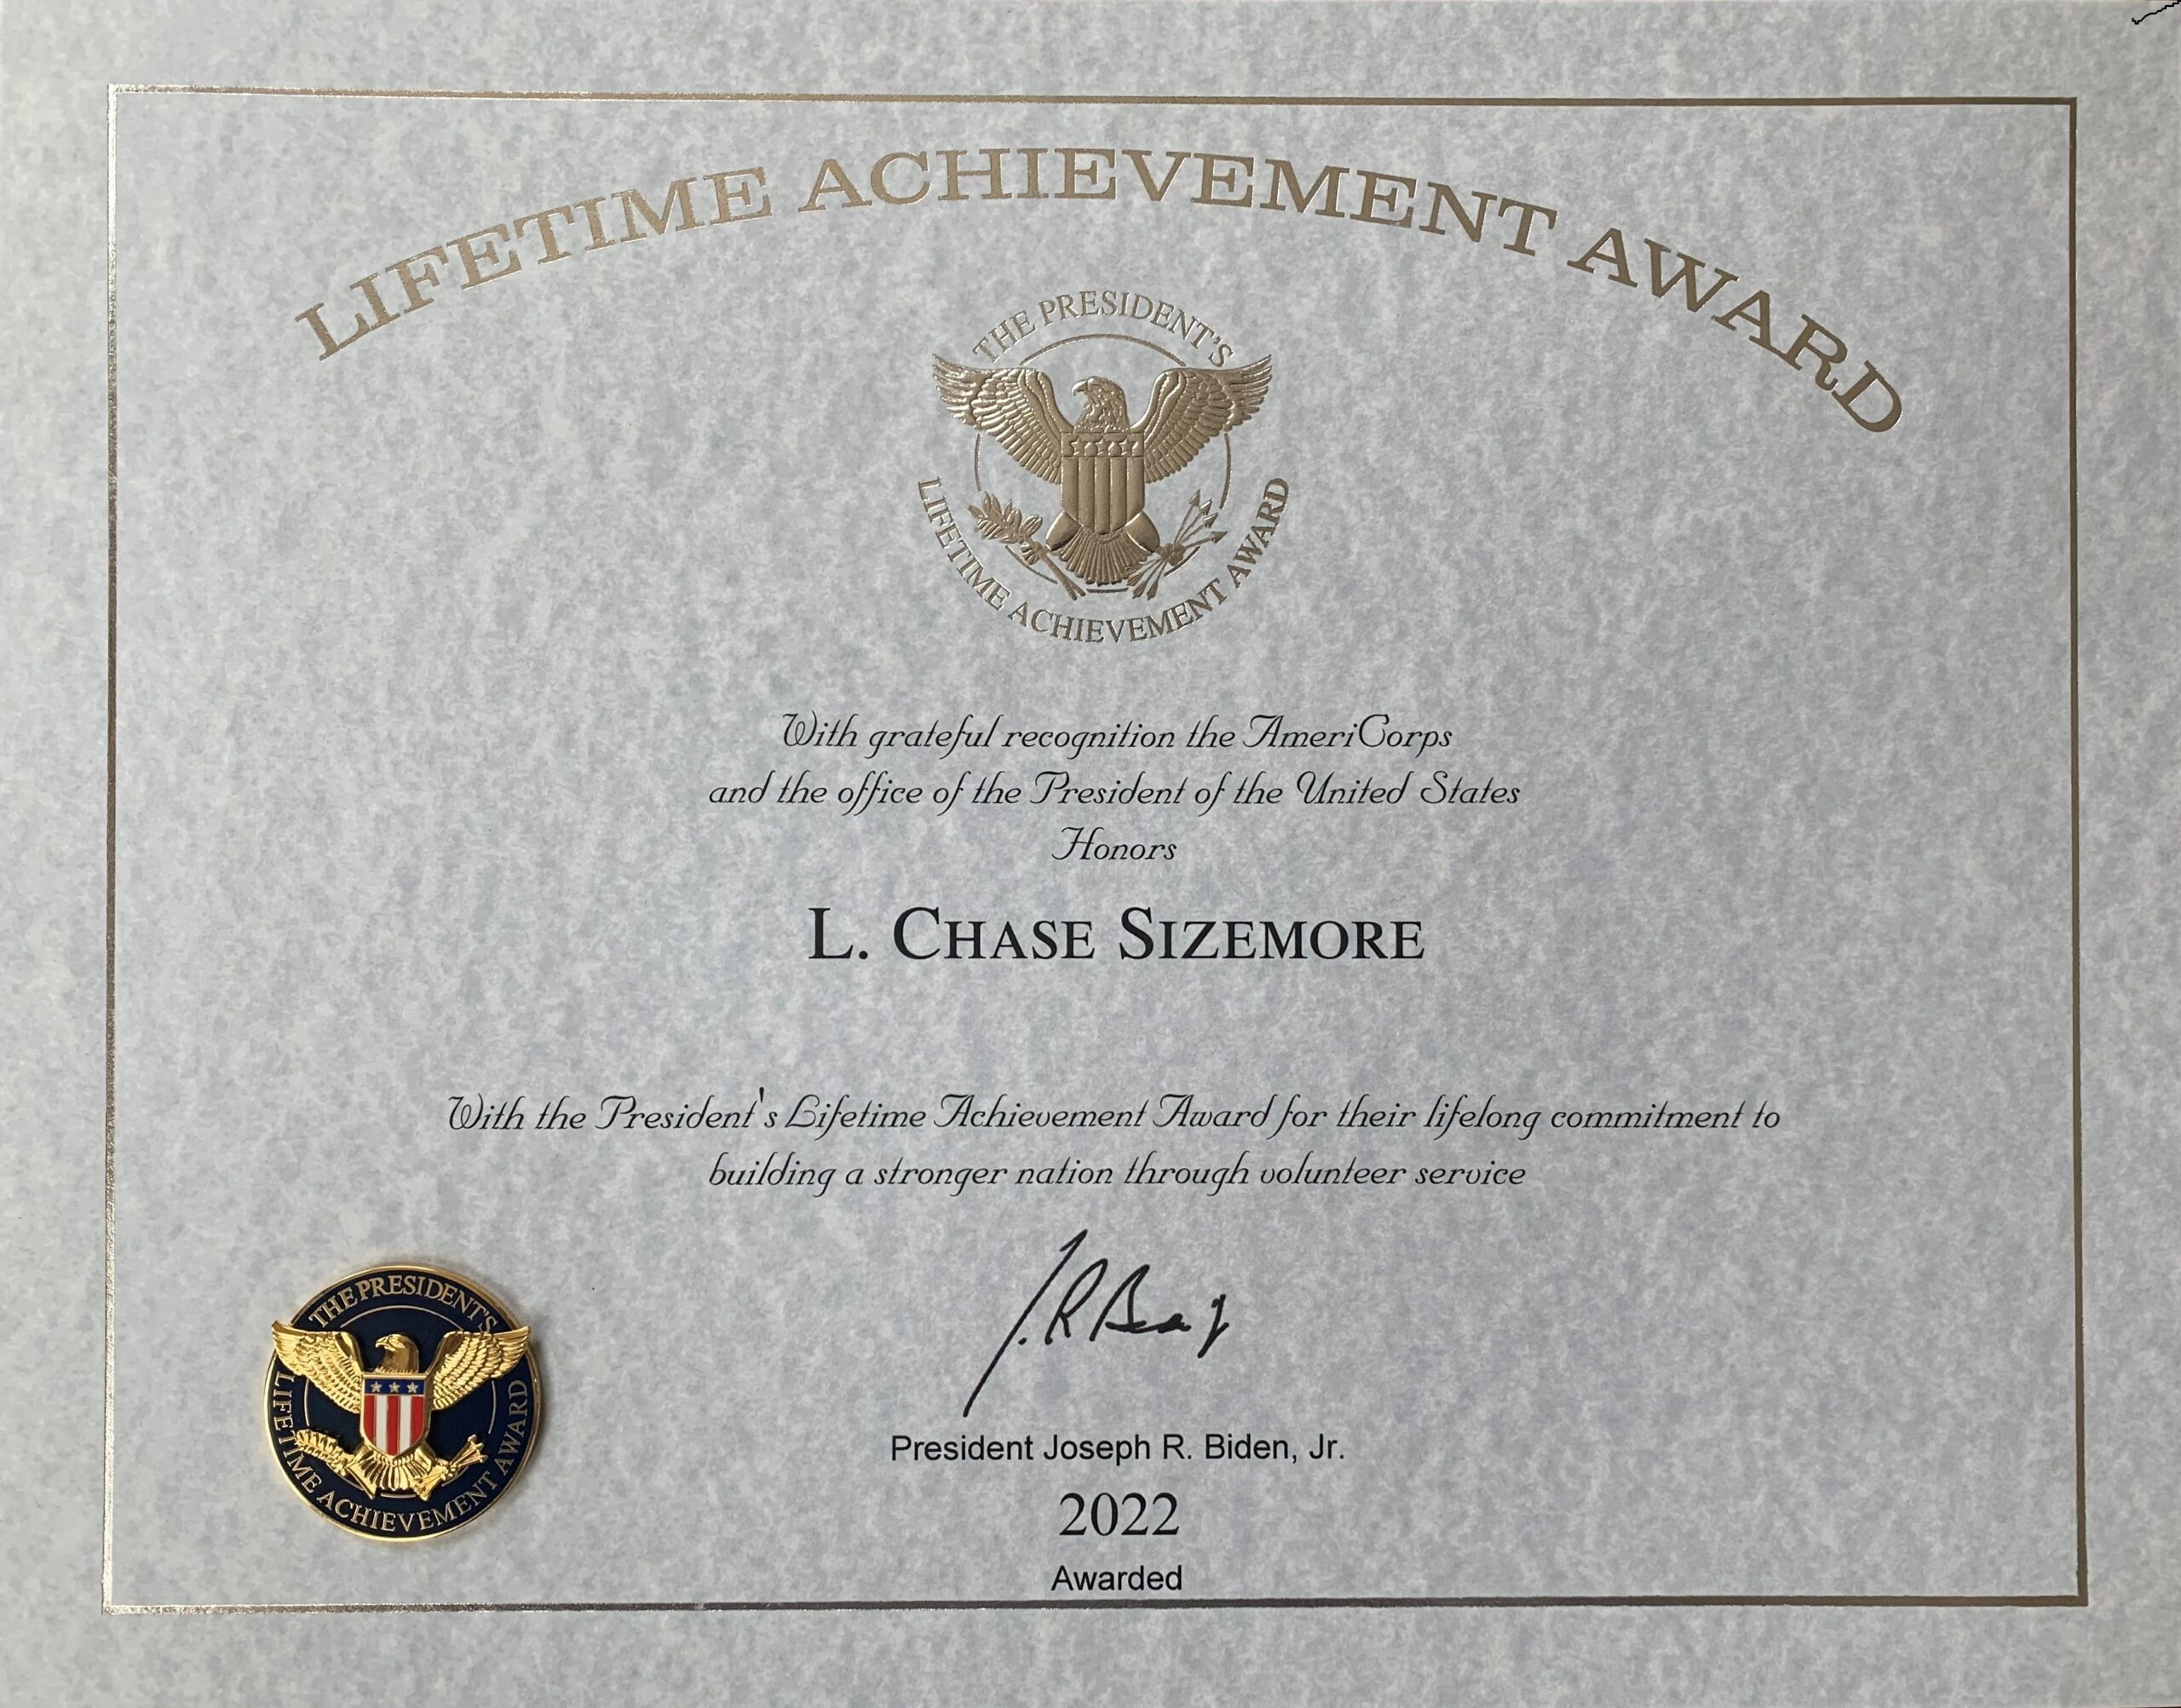 Lifetime Achievement Award for L. Chase Sizemore